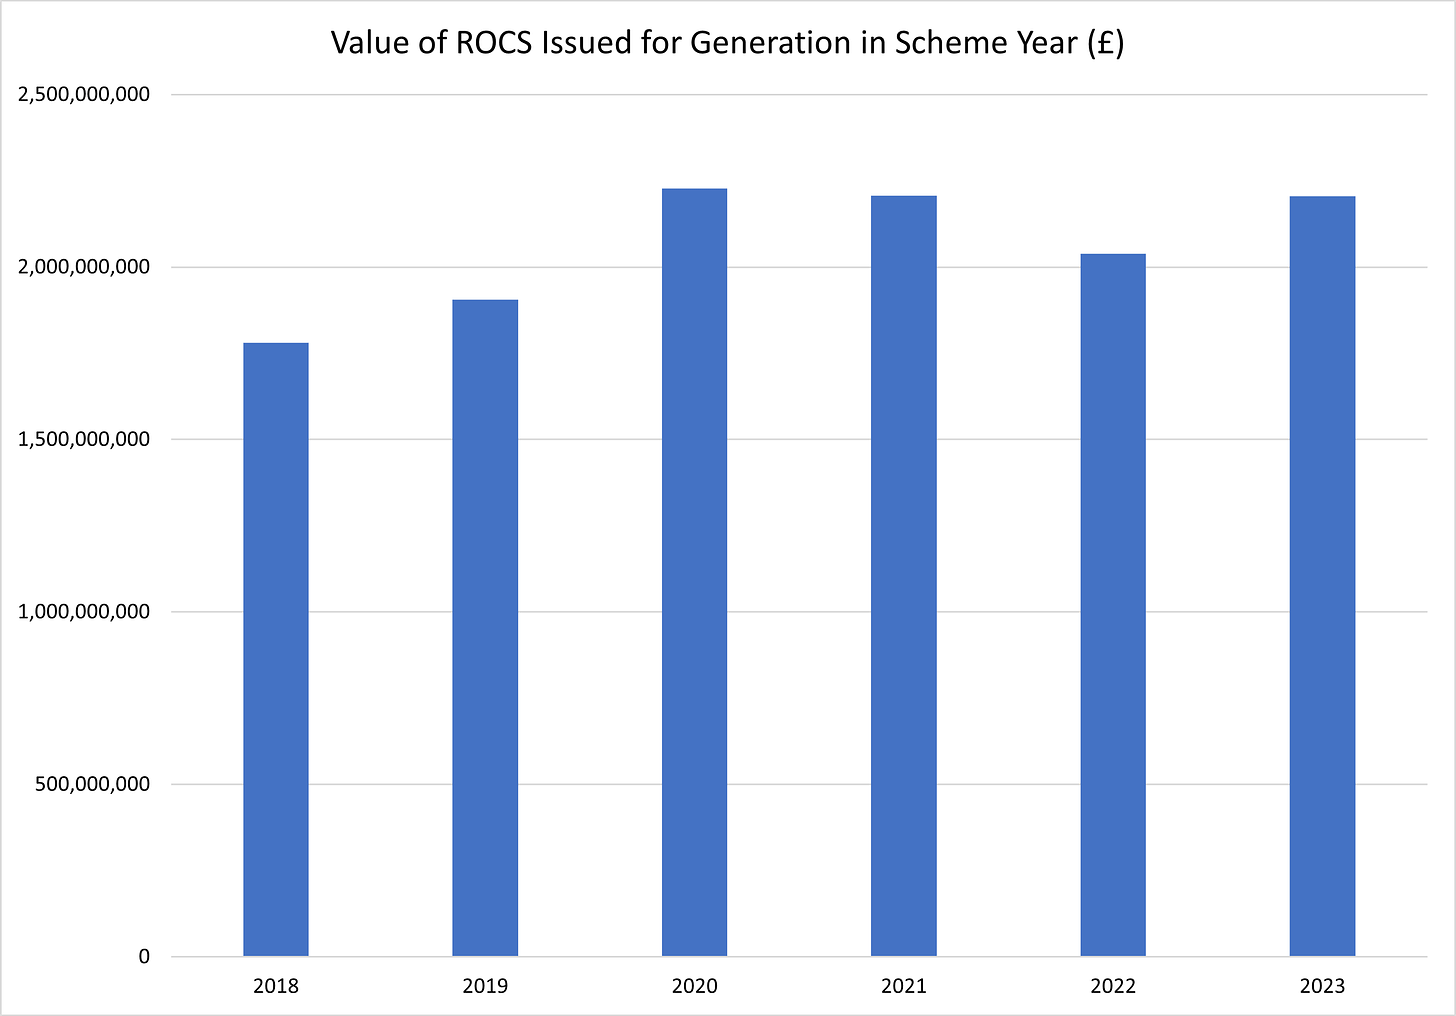 Figure B - Value of ROC certificates issued for generation in shceme year (£)